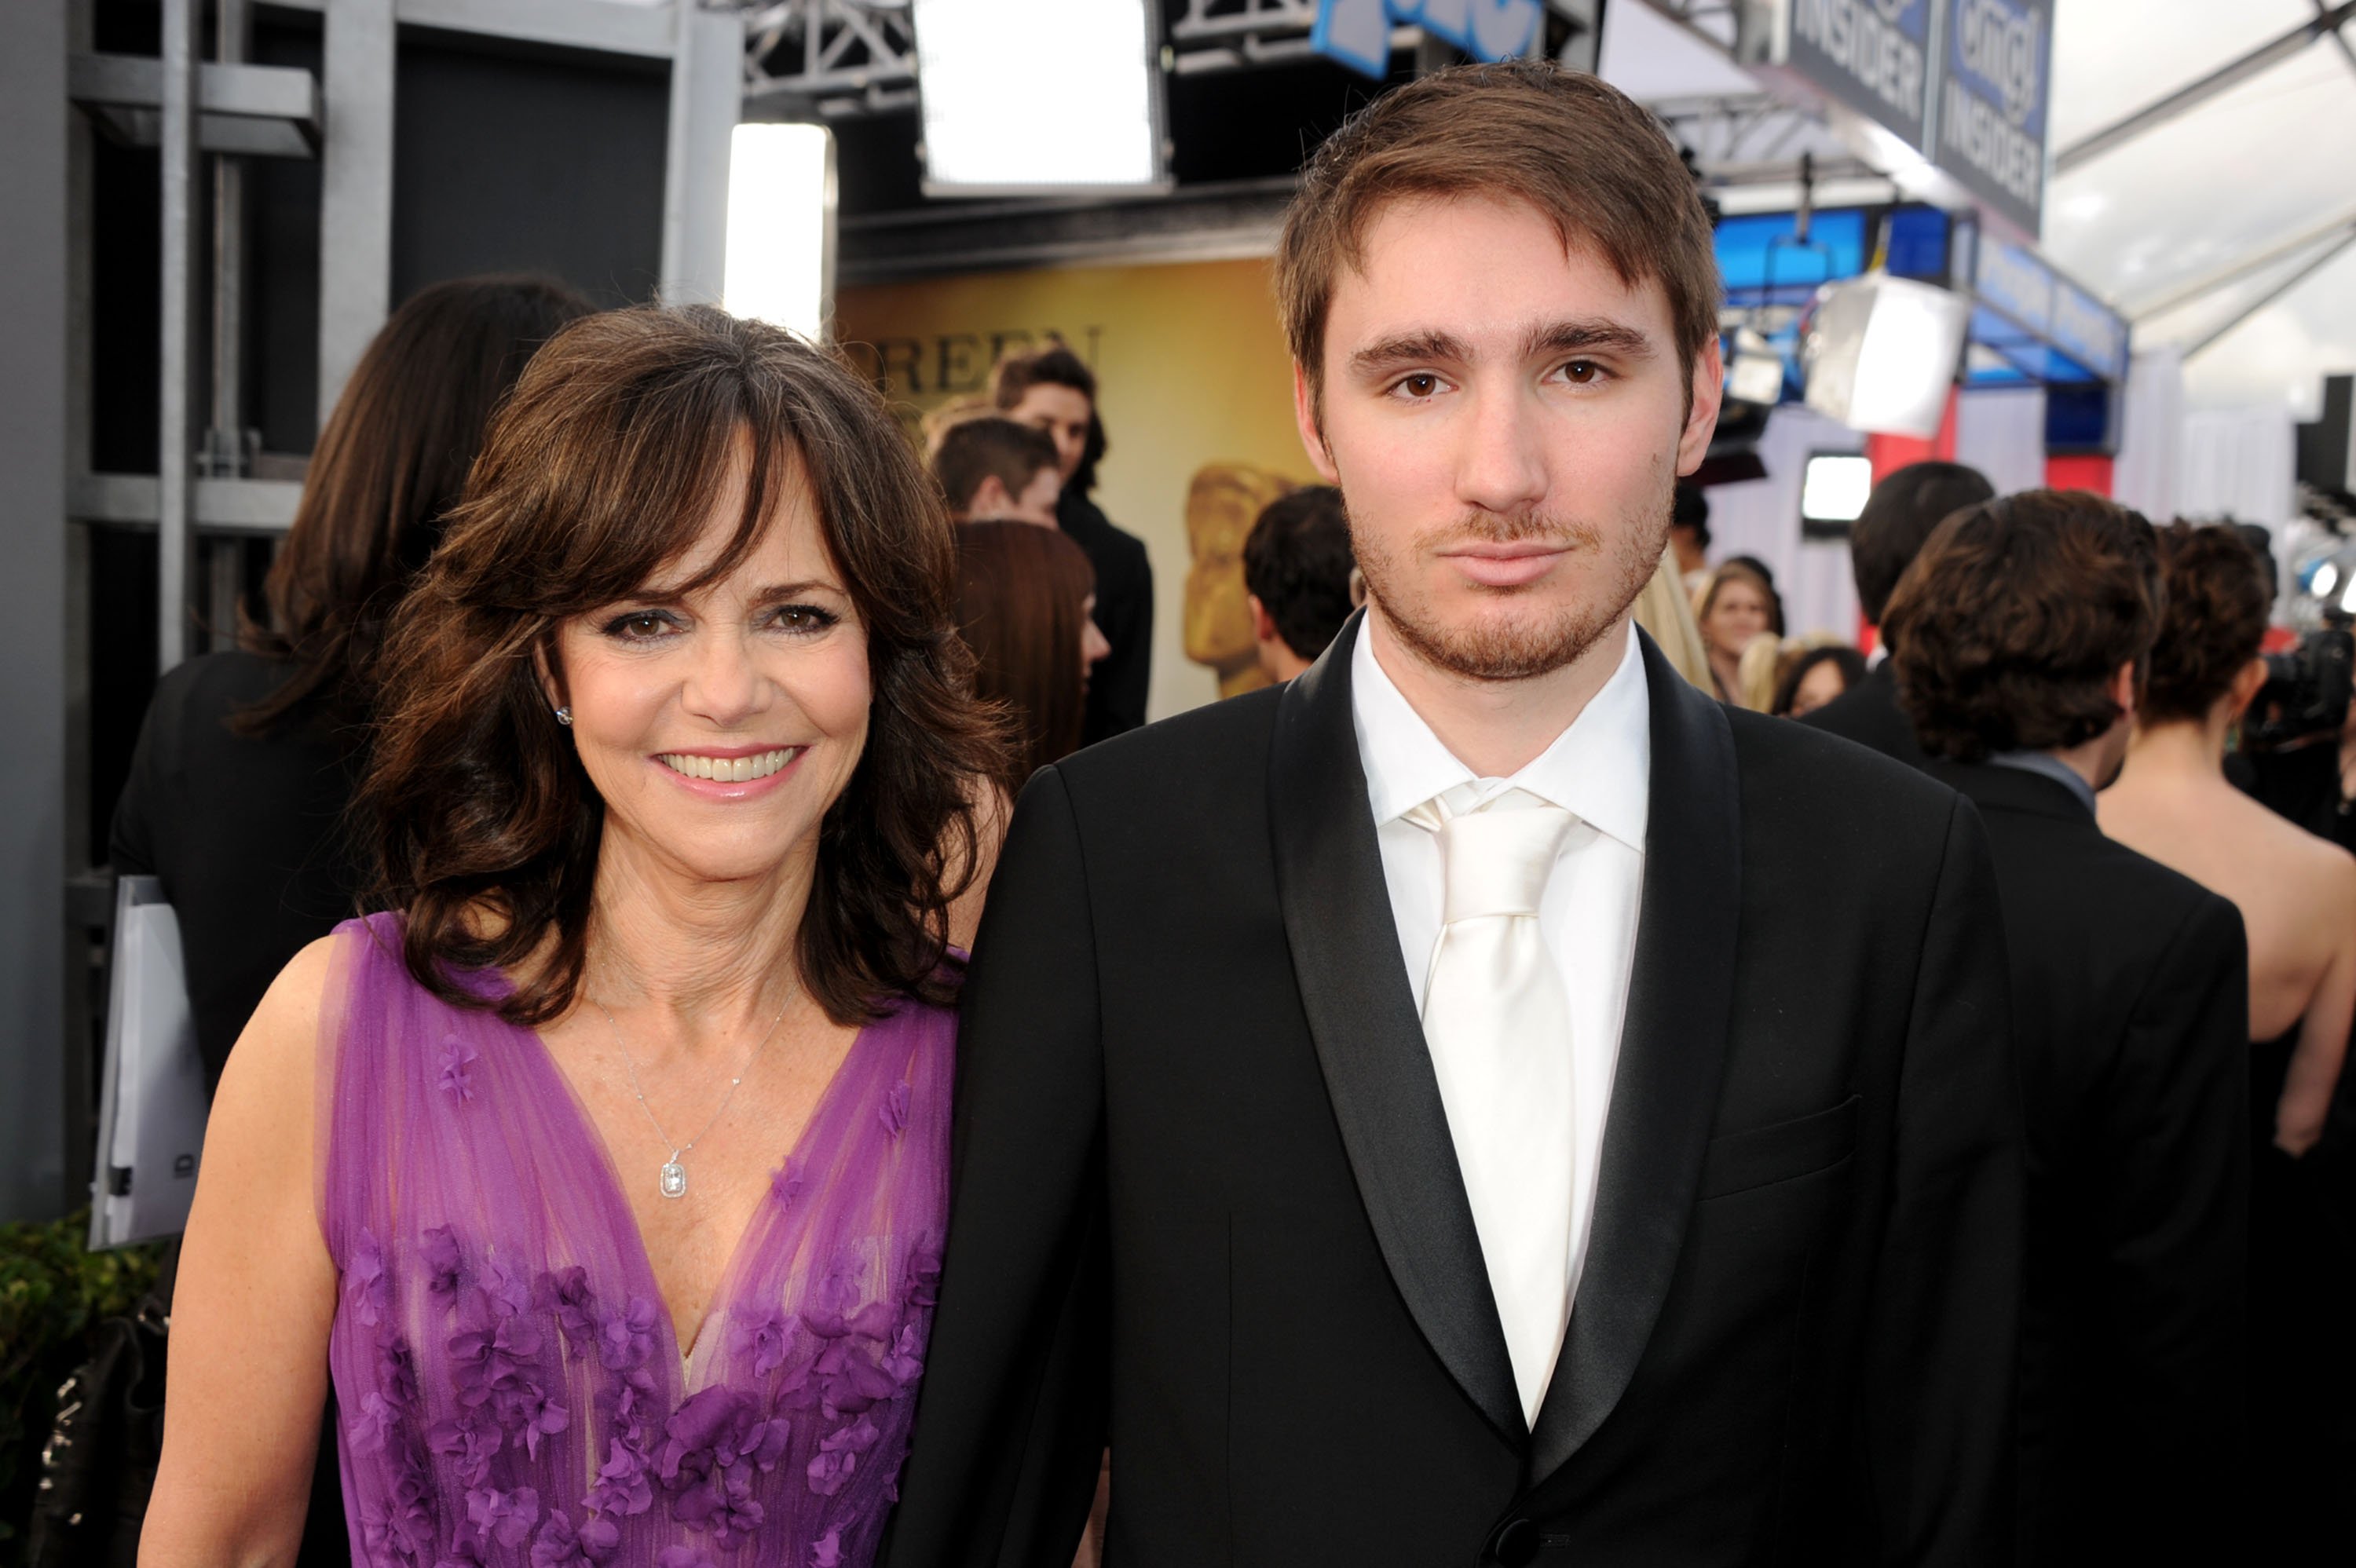 Actress Sally Field and her son, Sam Greisman attend the 19th Annual Screen Actors Guild Awards at the Shrine Auditorium on January 27, 2013 in Los Angeles, California.  |  Source: Getty Images